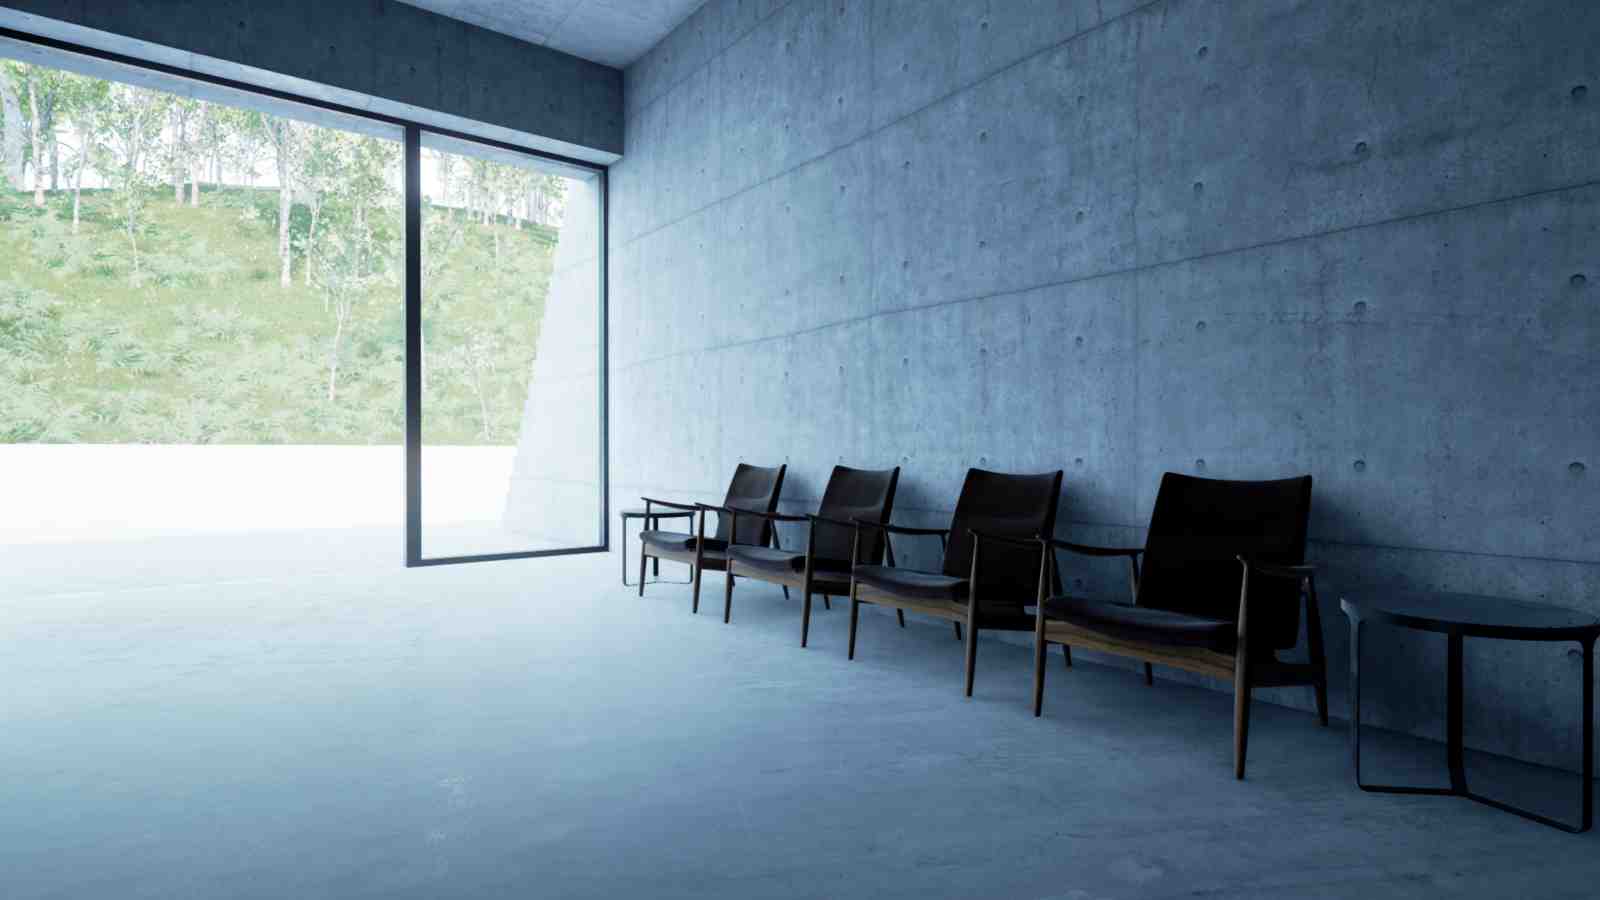 Concrete room looking out through an open door. The texture of the concrete can be seen and how it changes as you look closer to the door and there is more light – Chichu Art Museum, Japan. Designed by Tadao Ando and virtually reimagined by Eliot Blenkarne.